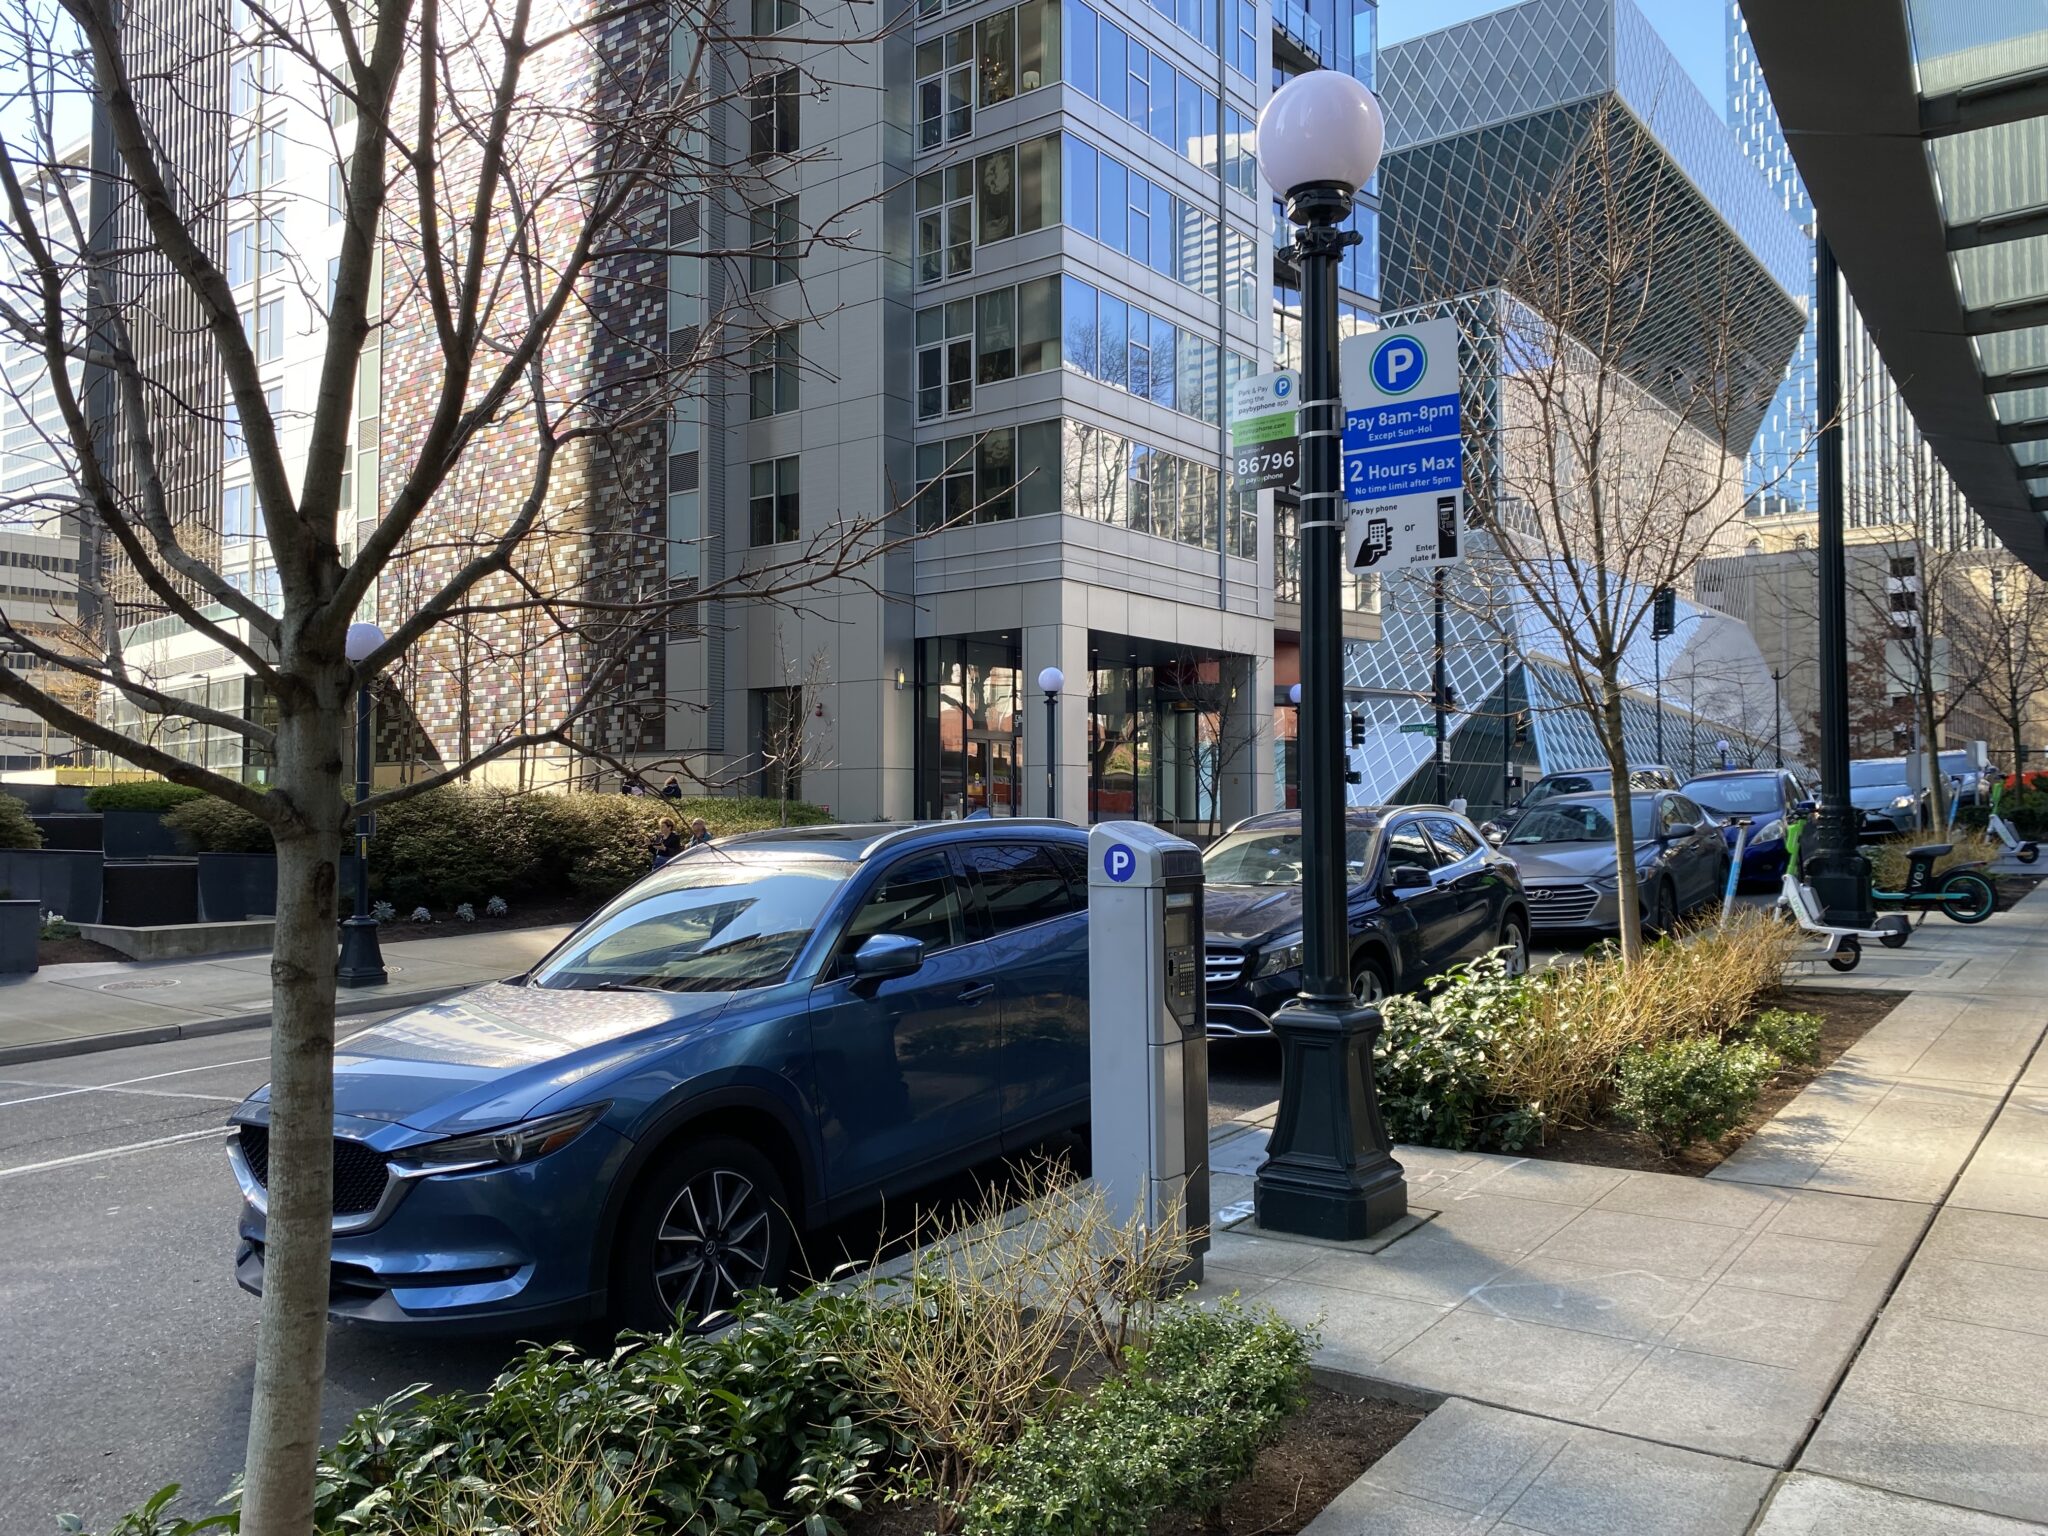 Cars parked by the curb at paid parking stations in Downtown. Paid parking indicated by a white and blue sign with notice of paid parking from 8am to 8pm and a pay machine in front of it. Gray building with large windows in the background and a branch-like tree to the left of the image.